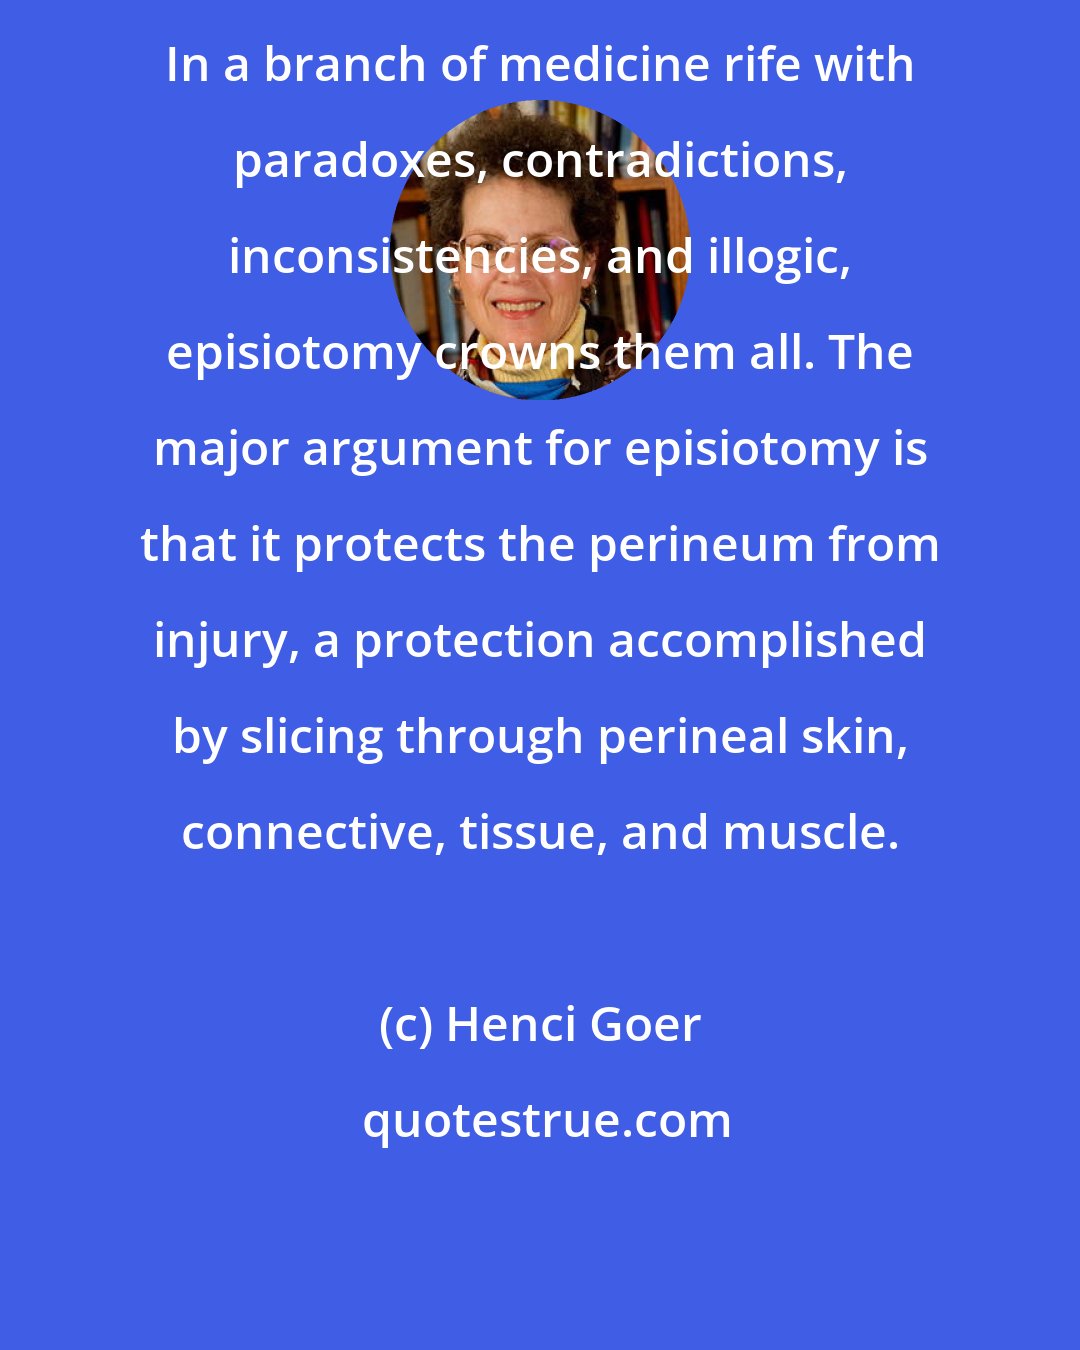 Henci Goer: In a branch of medicine rife with paradoxes, contradictions, inconsistencies, and illogic, episiotomy crowns them all. The major argument for episiotomy is that it protects the perineum from injury, a protection accomplished by slicing through perineal skin, connective, tissue, and muscle.